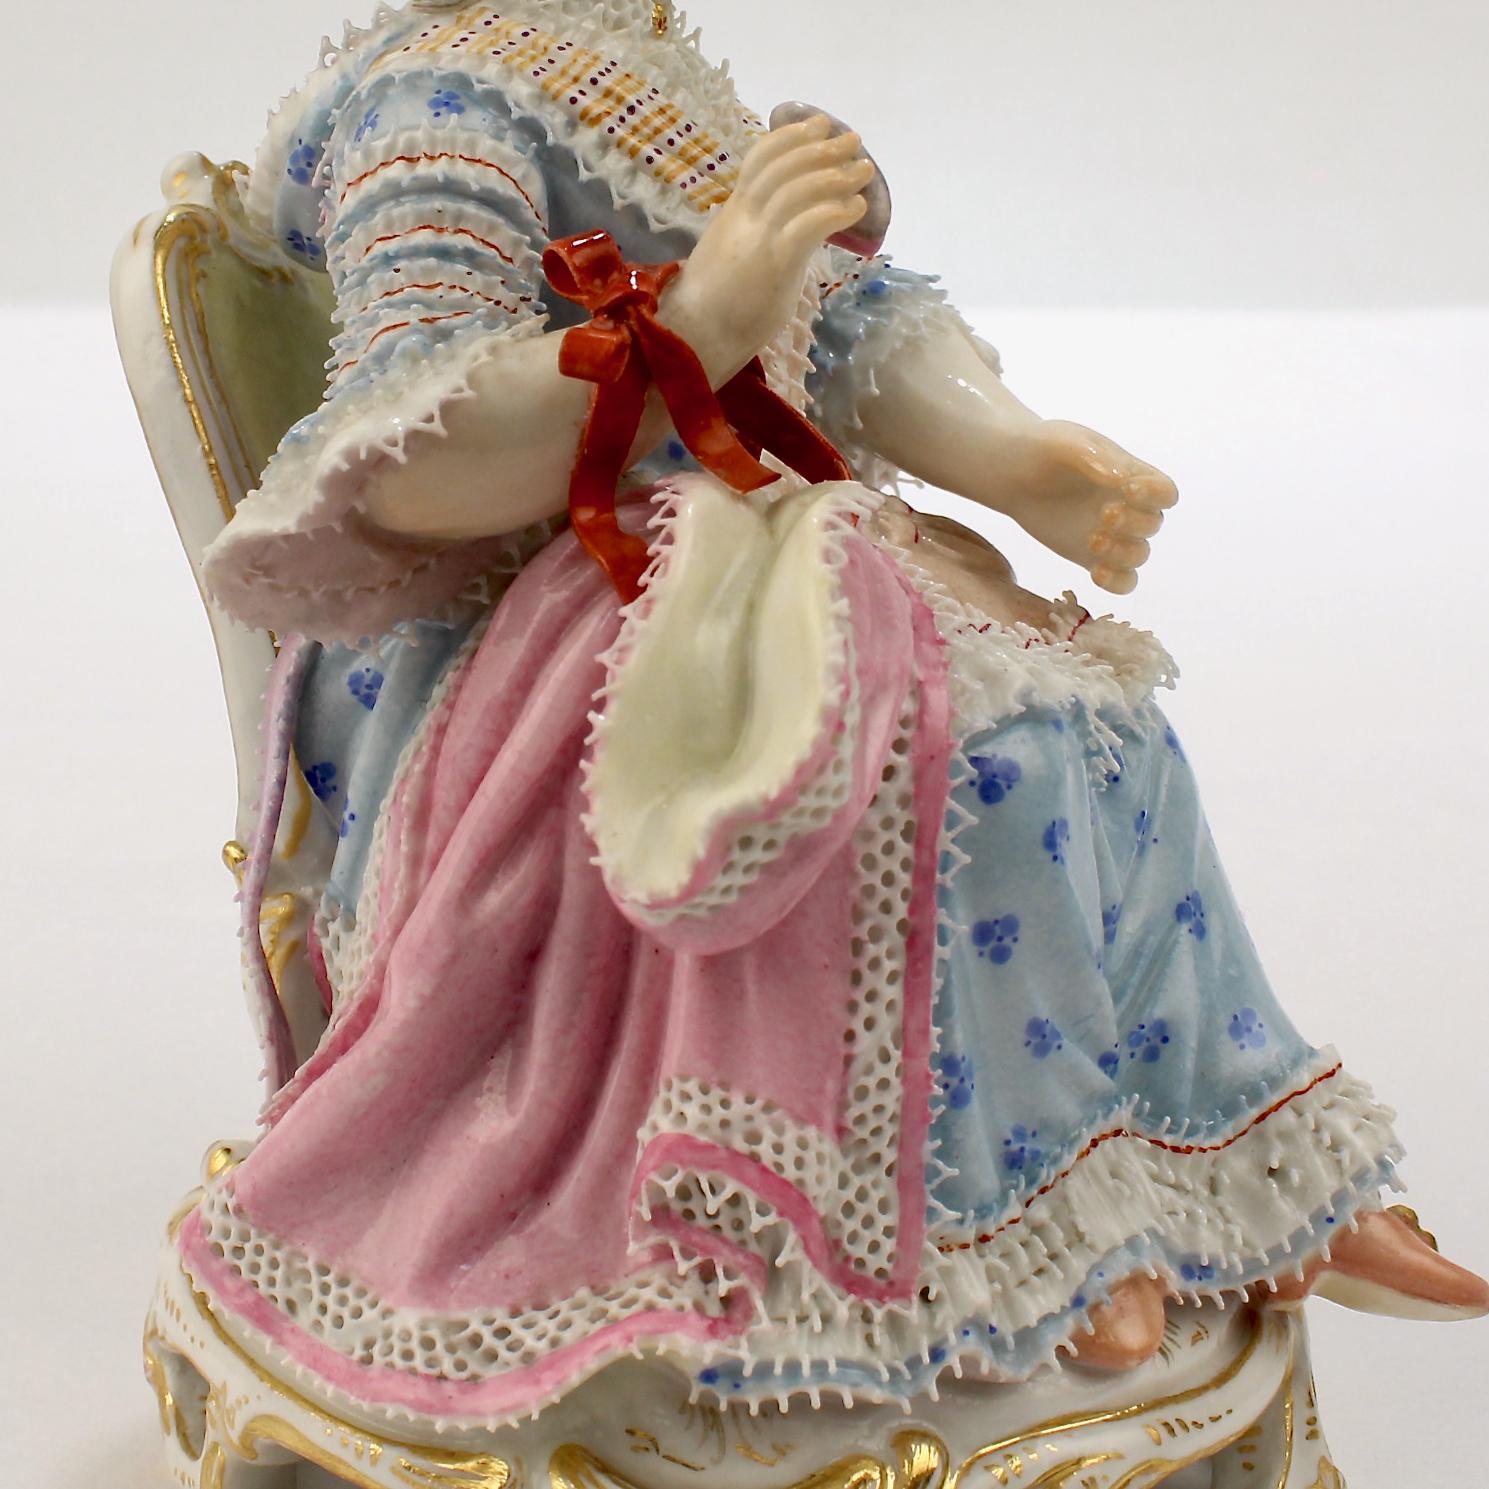 Antique Meissen Porcelain Figurine of a Girl with a Thread Winder Model No. C 28 5